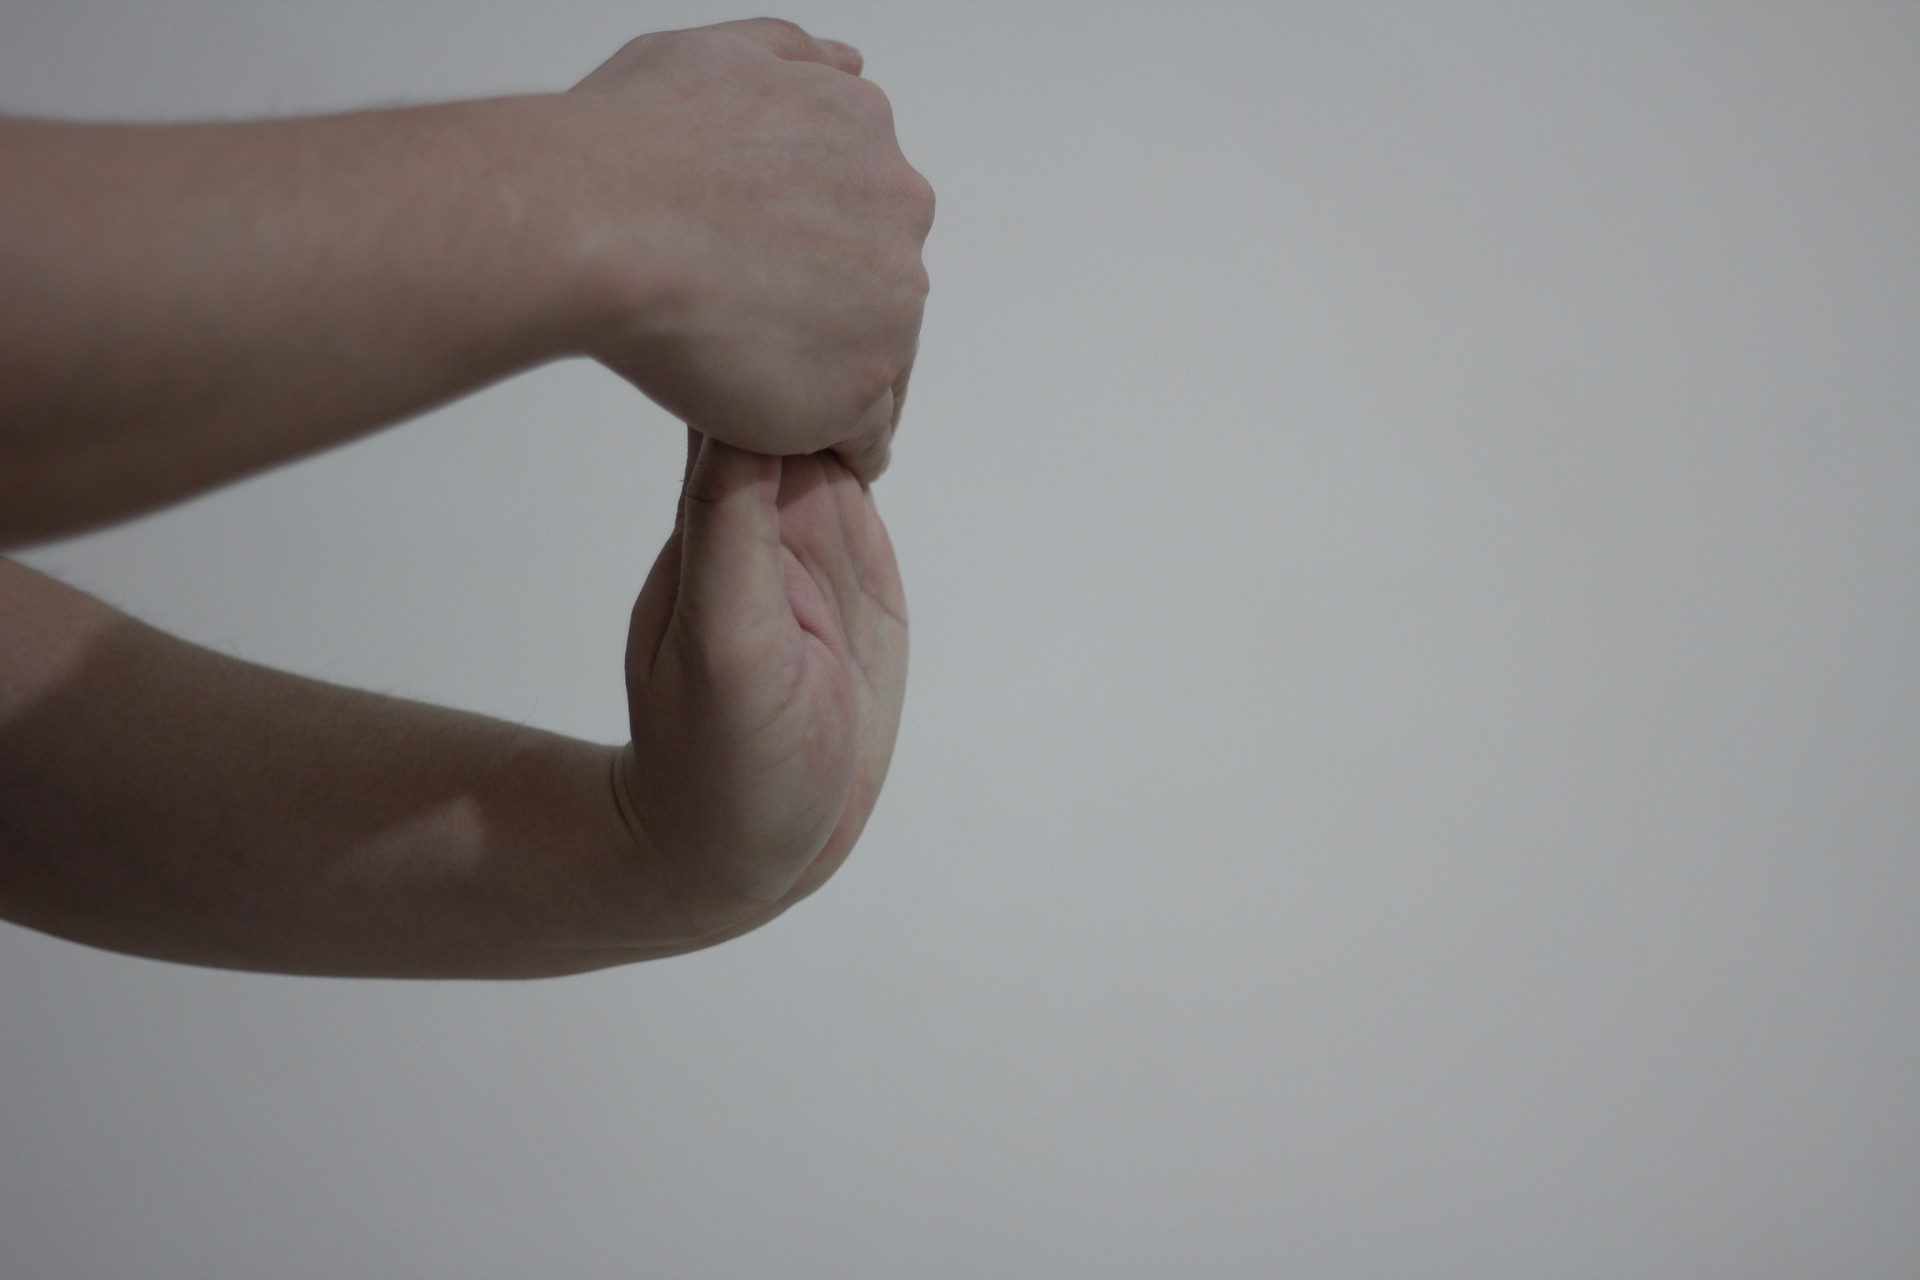 wrist-stretching-exercise-2-free-stock-photo-public-domain-pictures